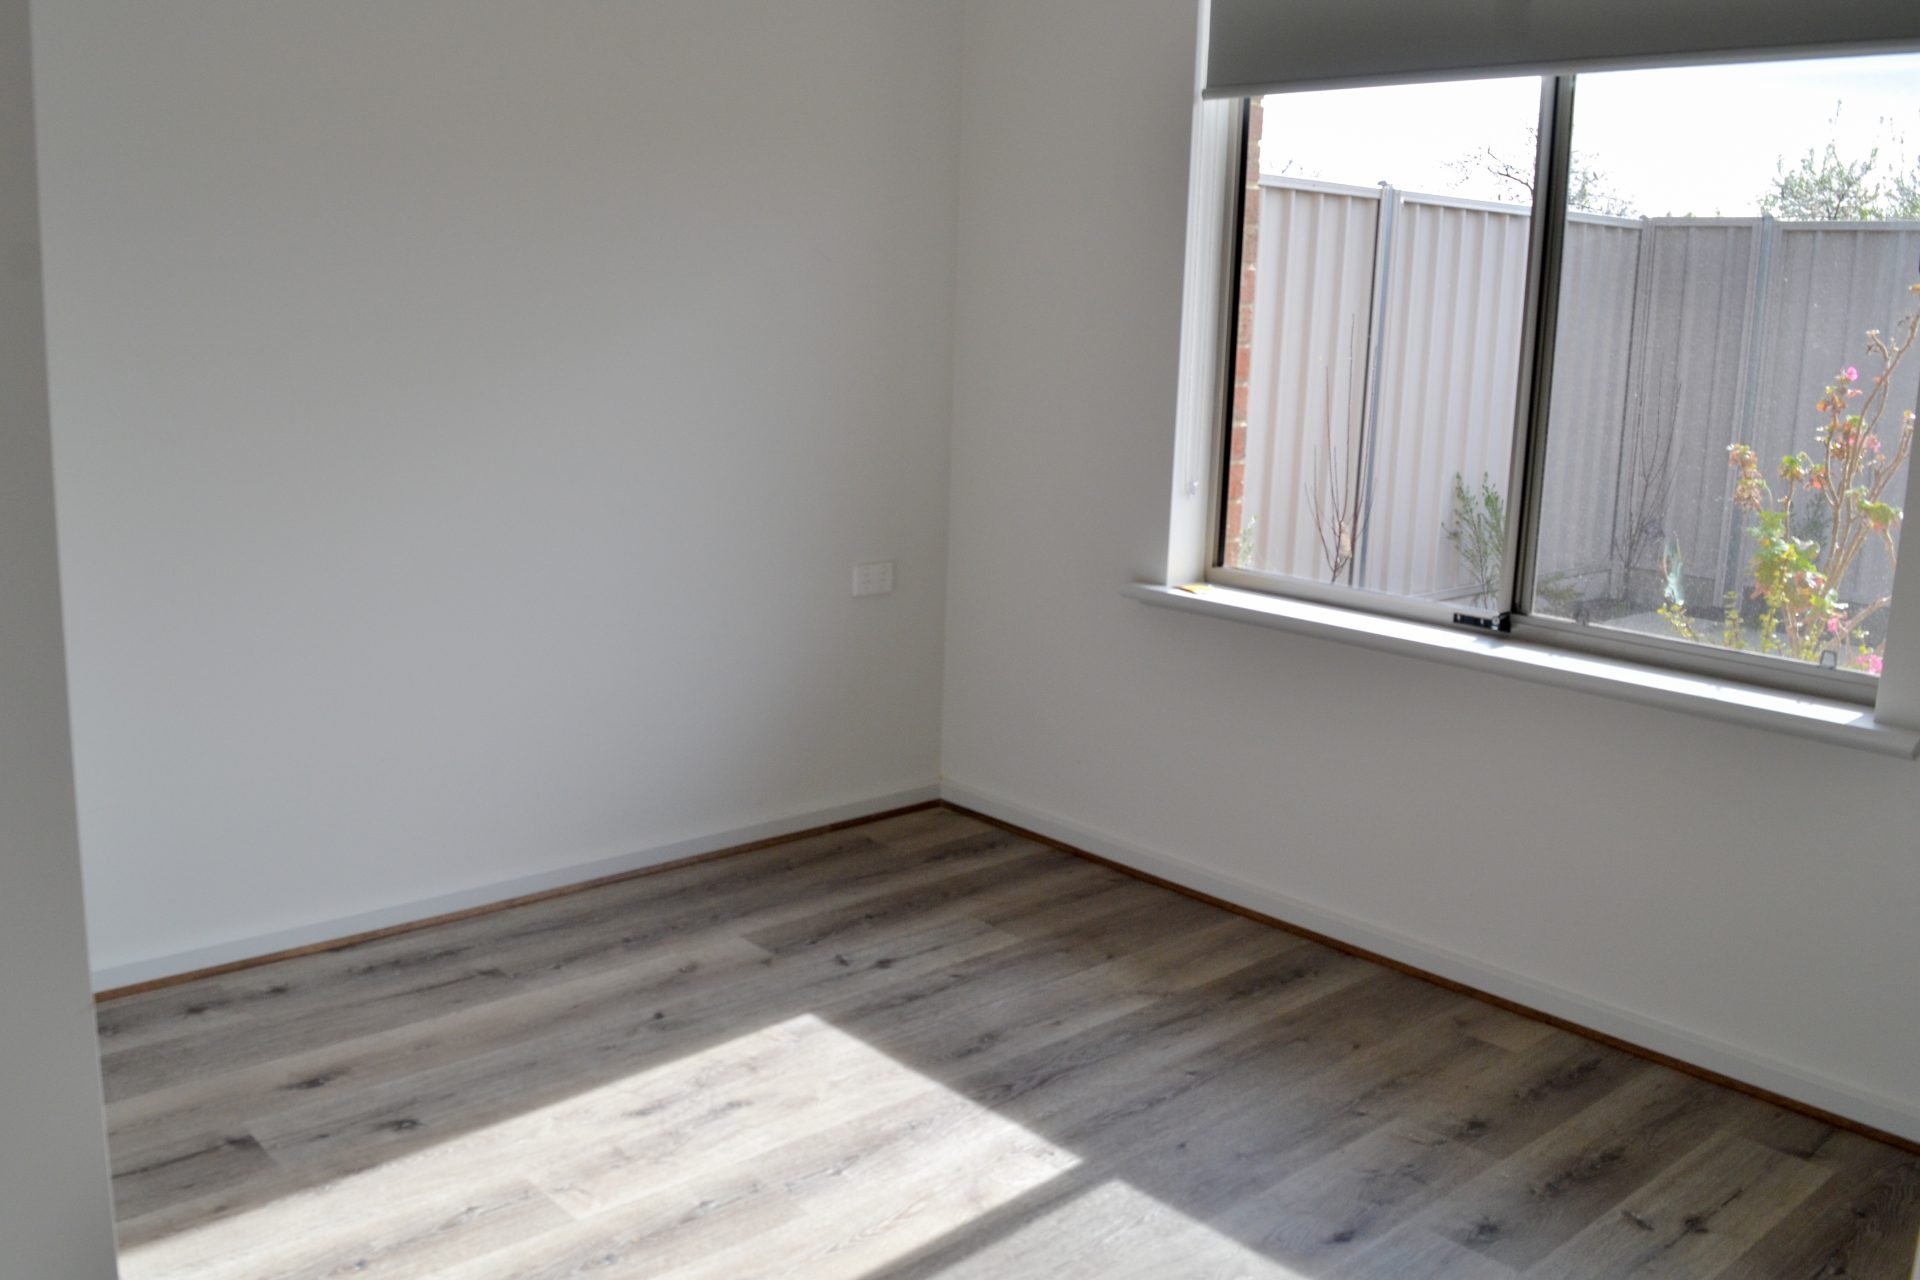 Empty bedroom with timber flooring. Window overlooks rear yard with native plant life. 